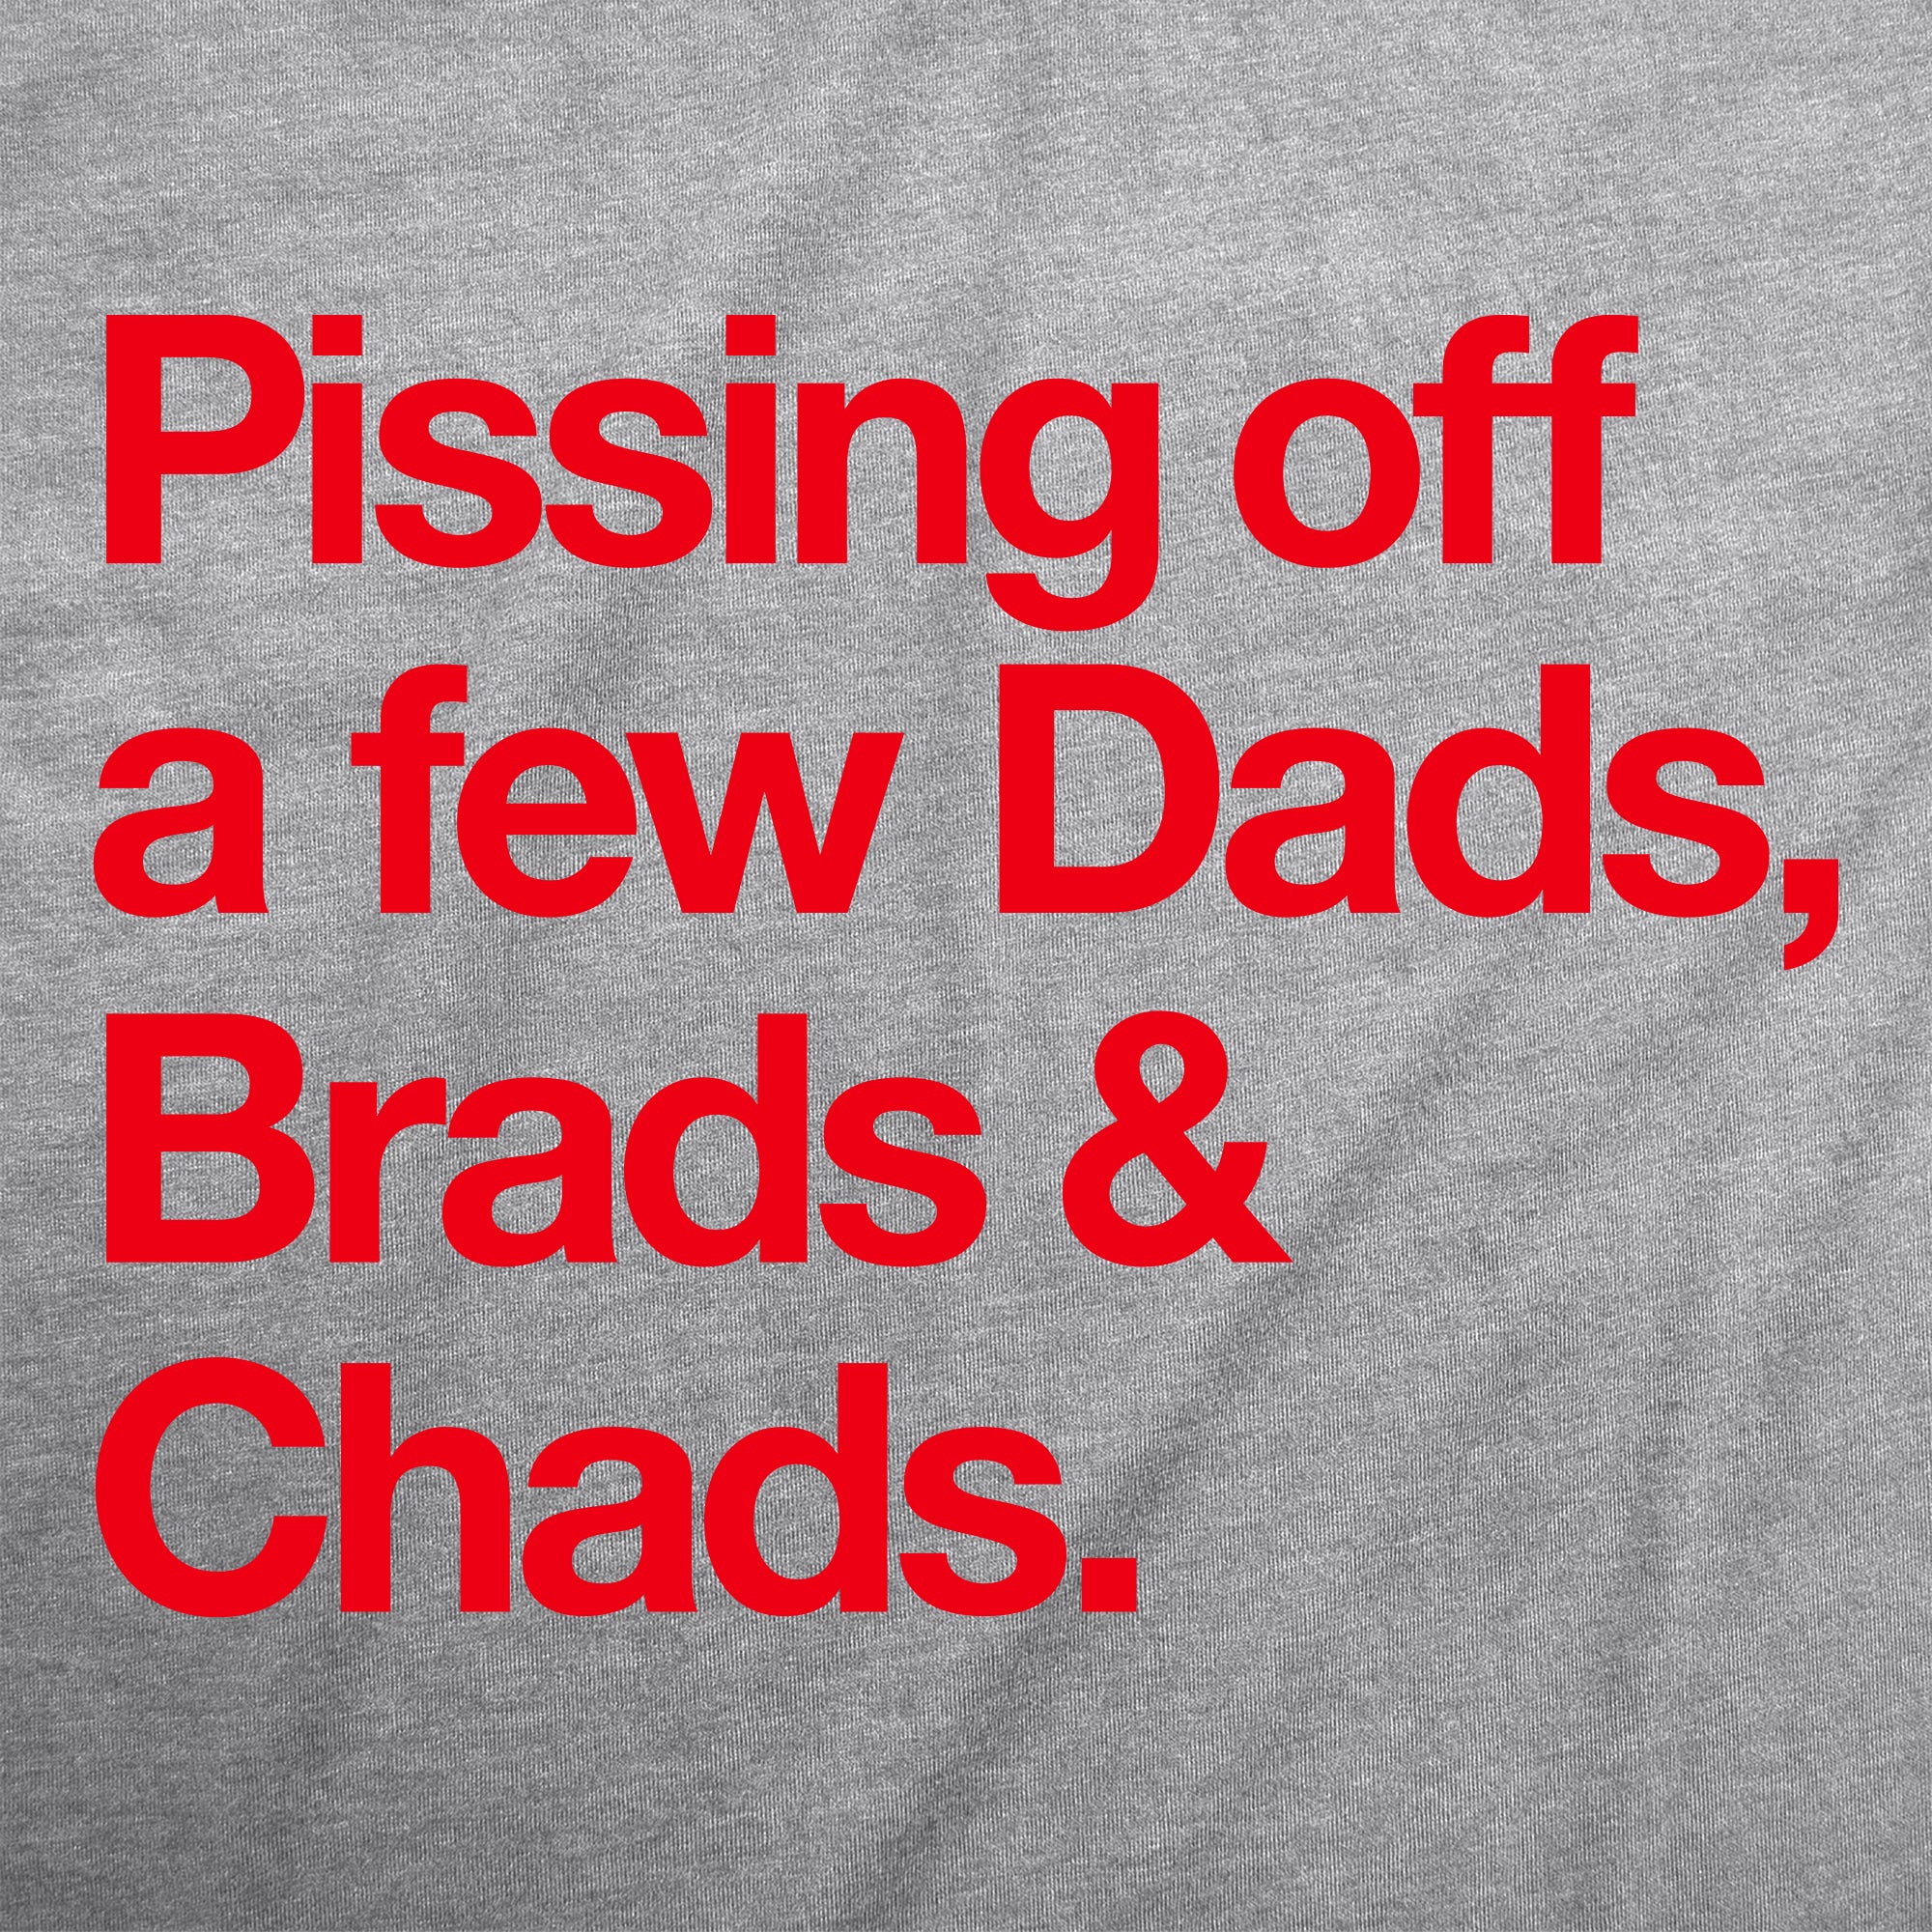 Funny Light Heather Grey - Pissing Off Pissing Off A Few Dads Brads And Chads Womens T Shirt Nerdy Football sarcastic Tee